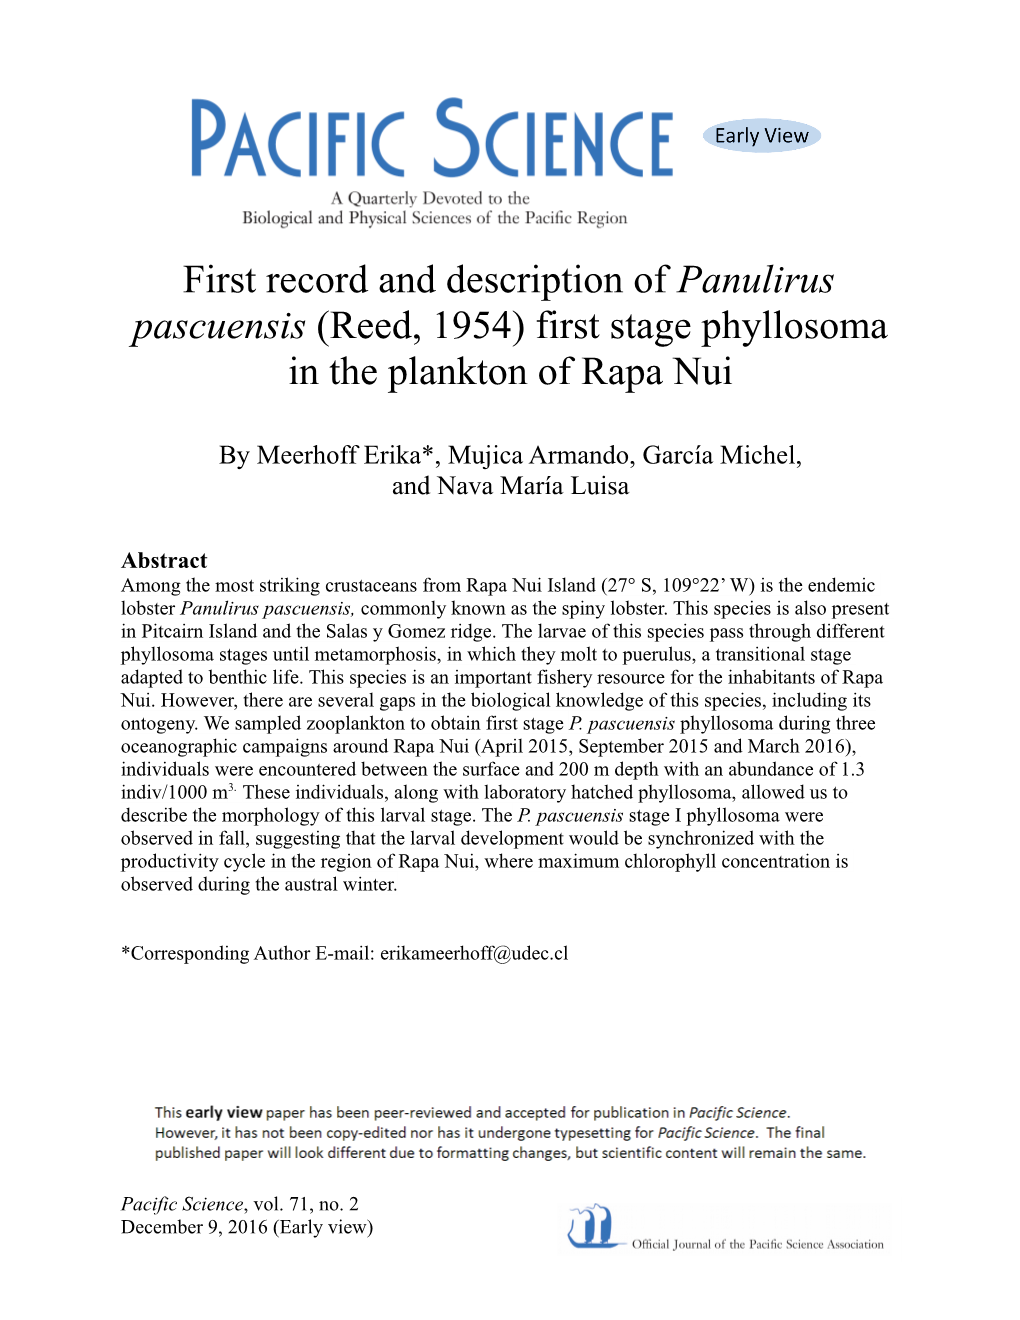 First Record and Description of Panulirus Pascuensis (Reed, 1954) First Stage Phyllosoma in the Plankton of Rapa Nui